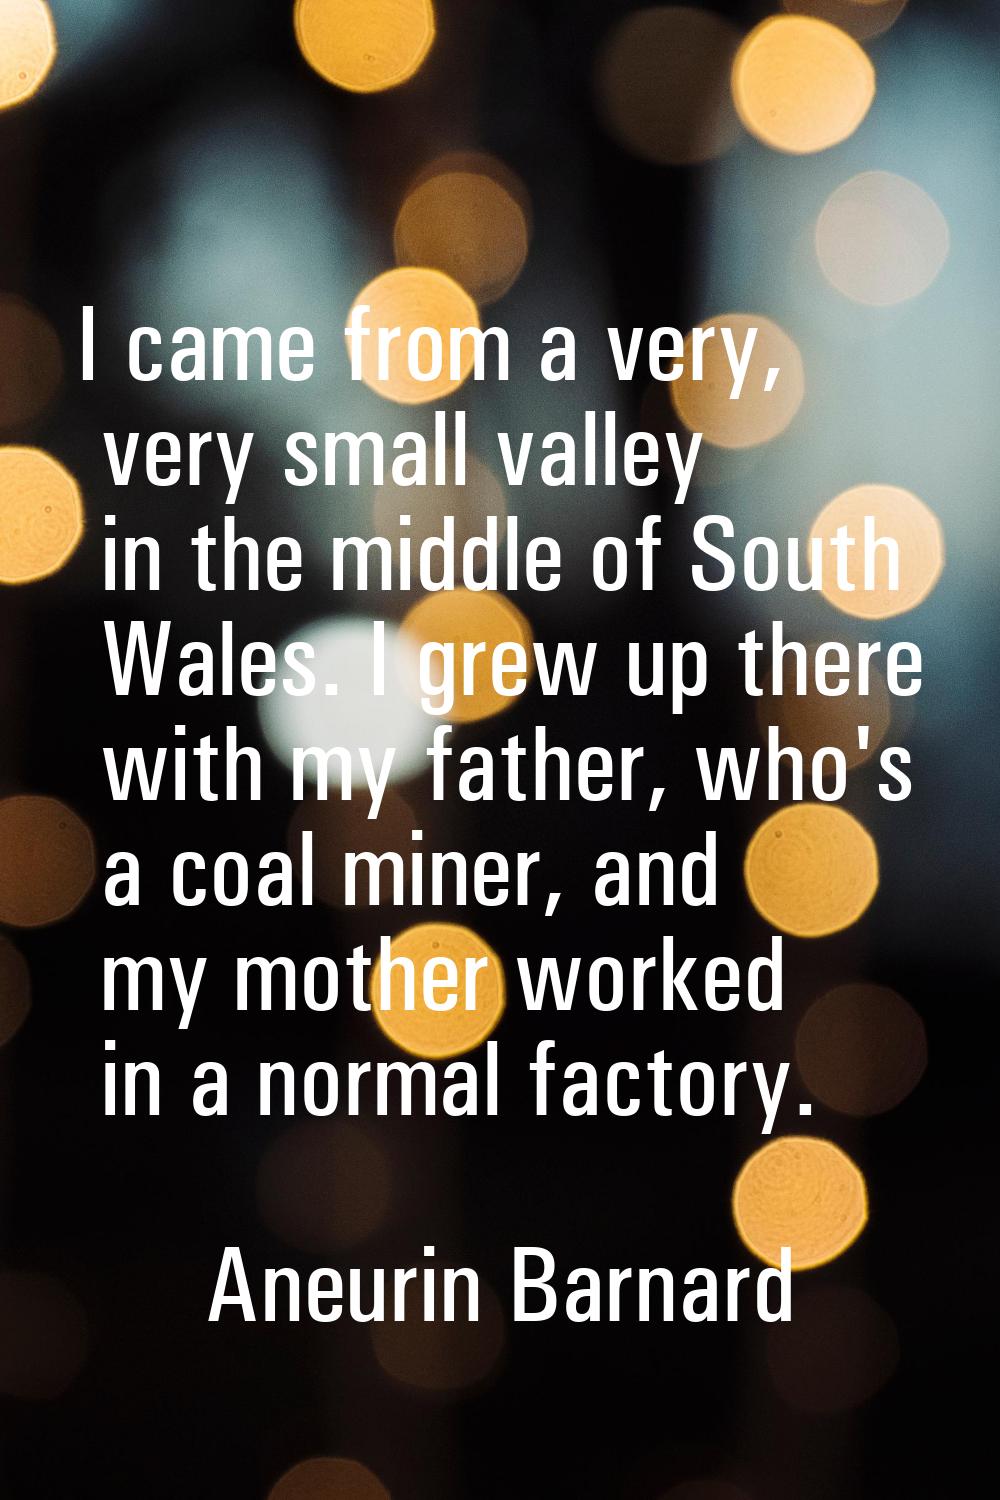 I came from a very, very small valley in the middle of South Wales. I grew up there with my father,